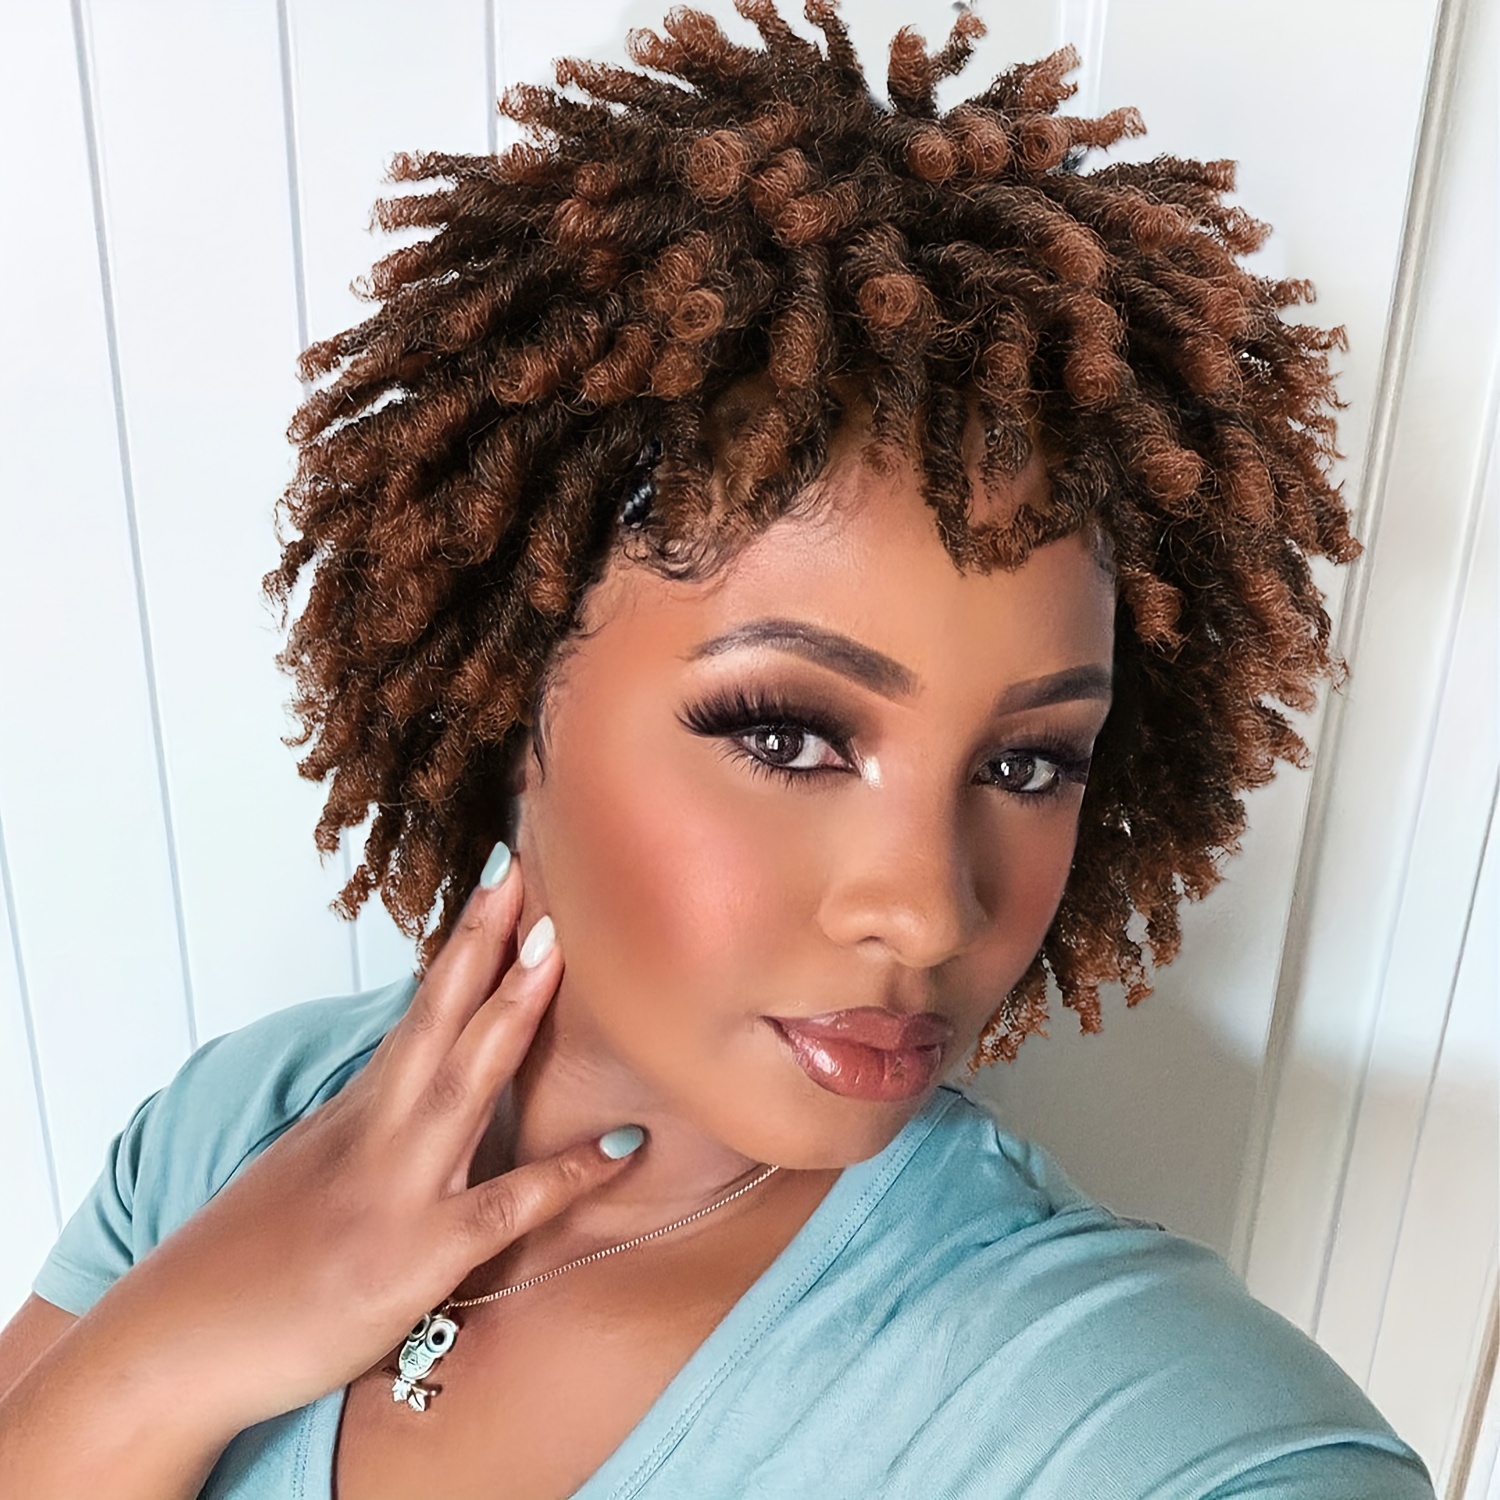 

Short Dreadlock Wig Short Afro Curly Braided Wigs For Women Twist Braiding Ombre Synthetic Hair Wigs 6 Inches(1b350)